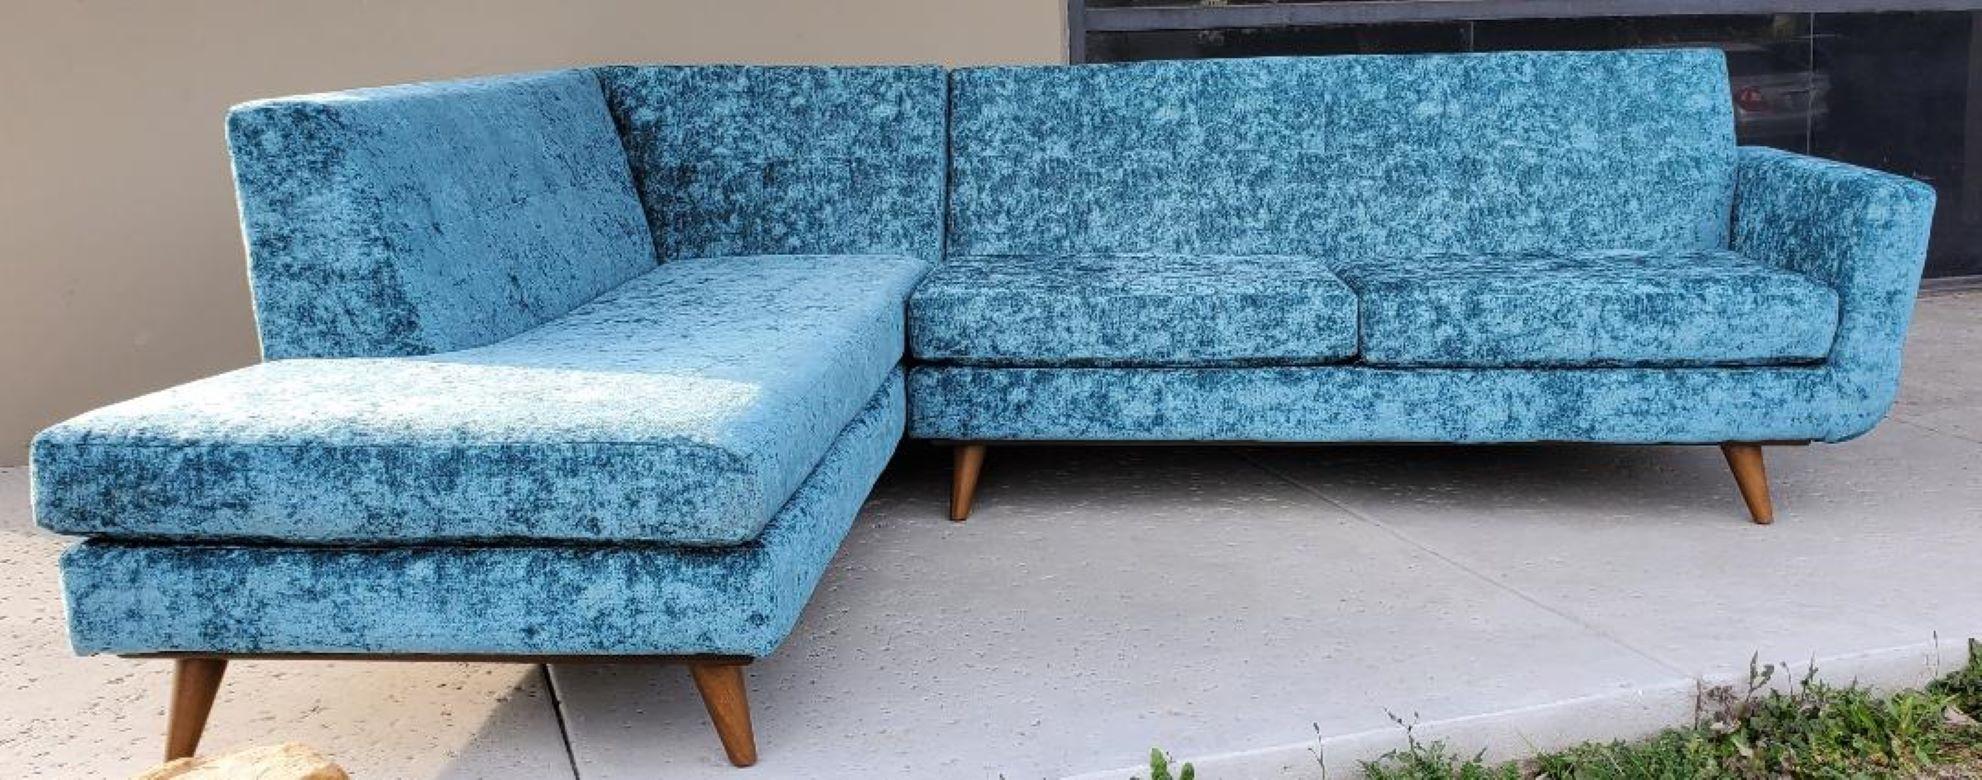 Mid-Century Modern 60s Low Slung Style Sectional Tapered Legs Aqua Green Crushed Velvet Upholstery For Sale